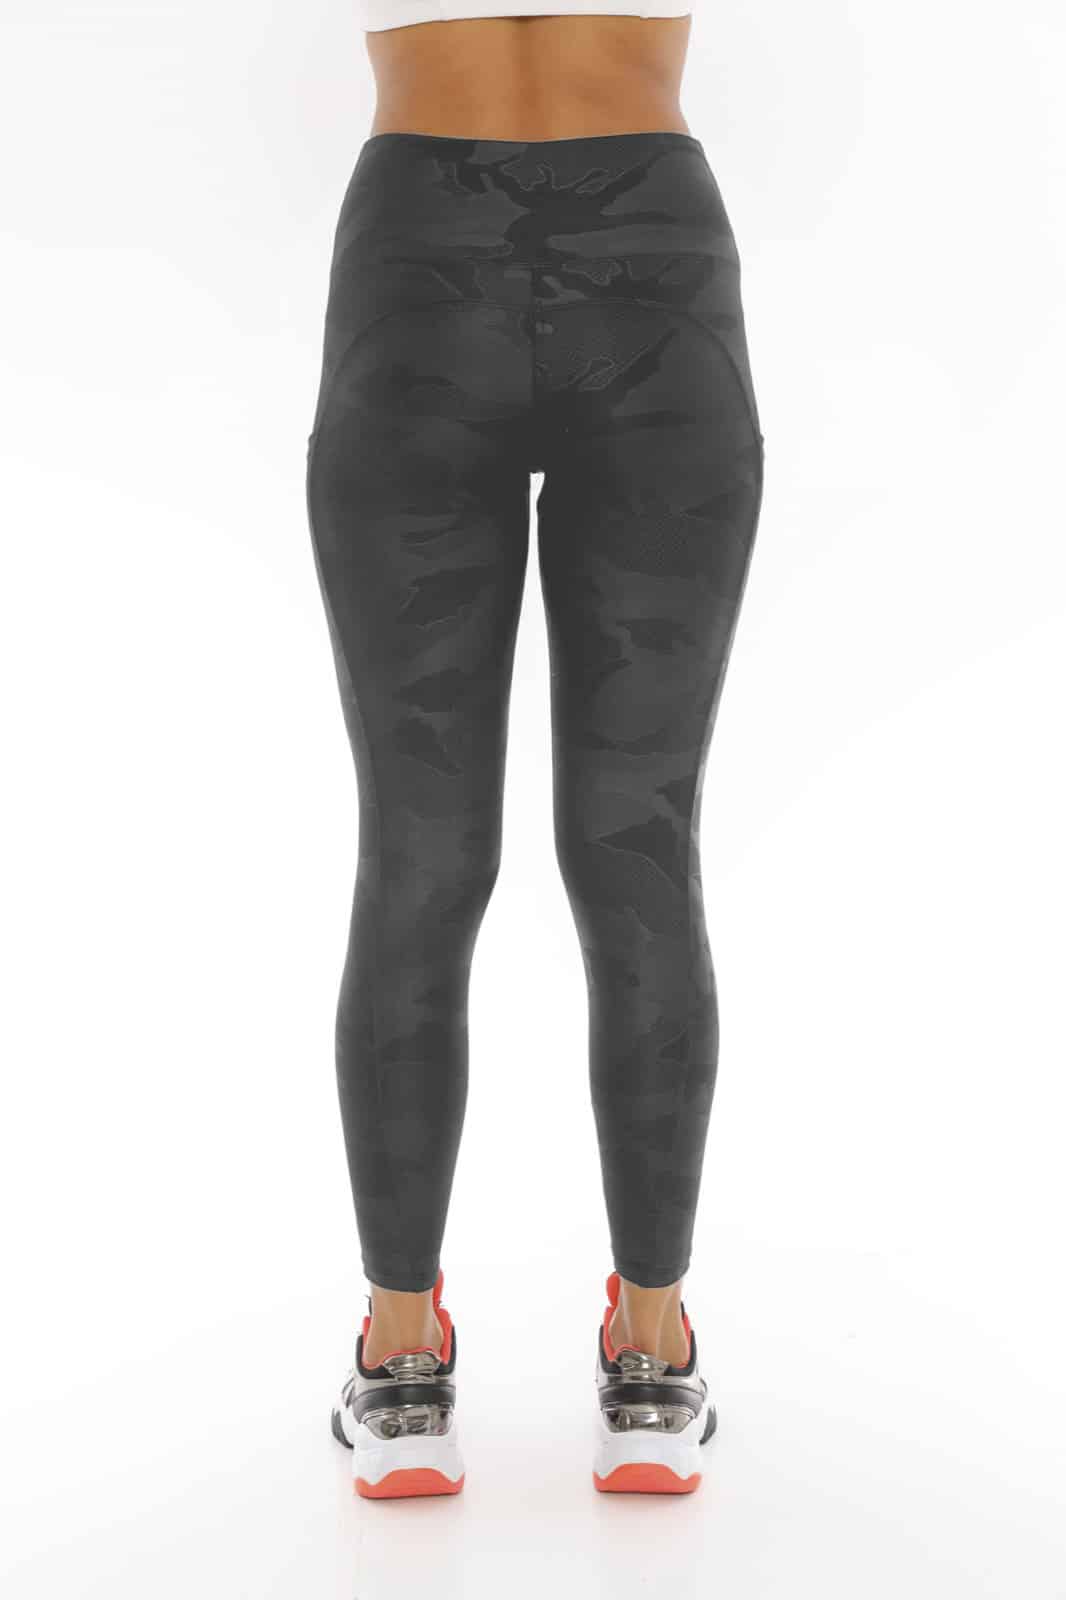 Activewear High Waisted Grey Color Camo Design Yoga Pants with Side Pockets  - Its All Leggings